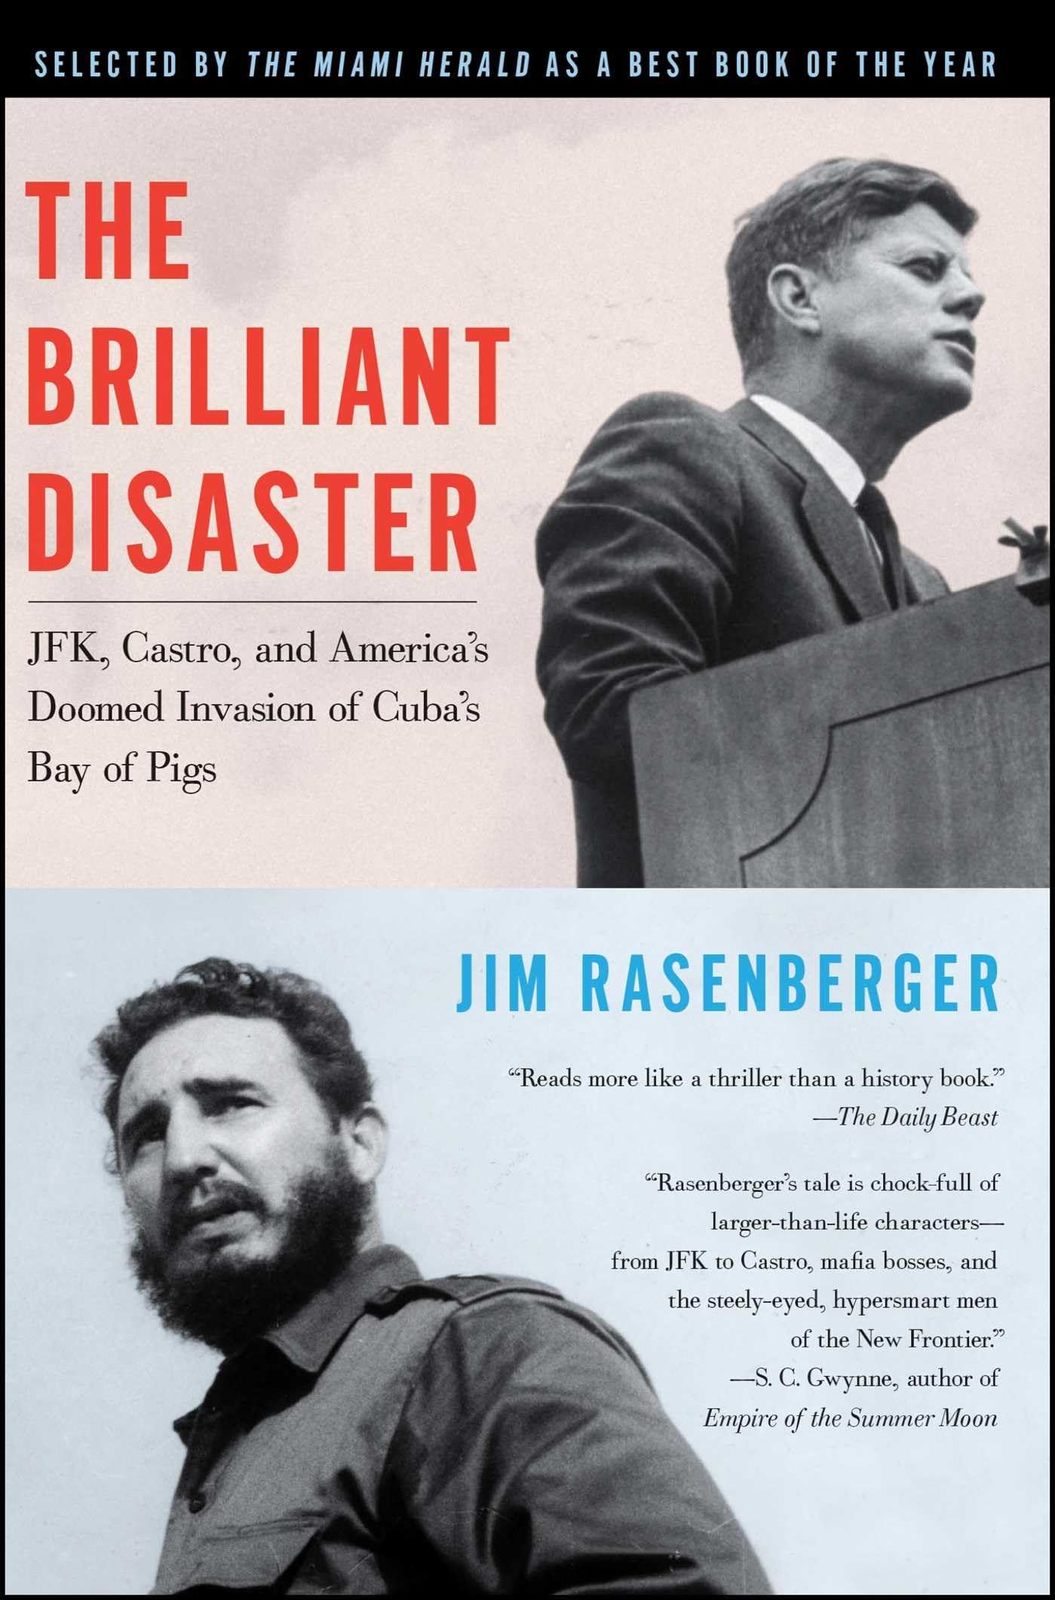 Primary image for The Brilliant Disaster: JFK, Castro, and America's Doomed Invasion of Cuba's Bay